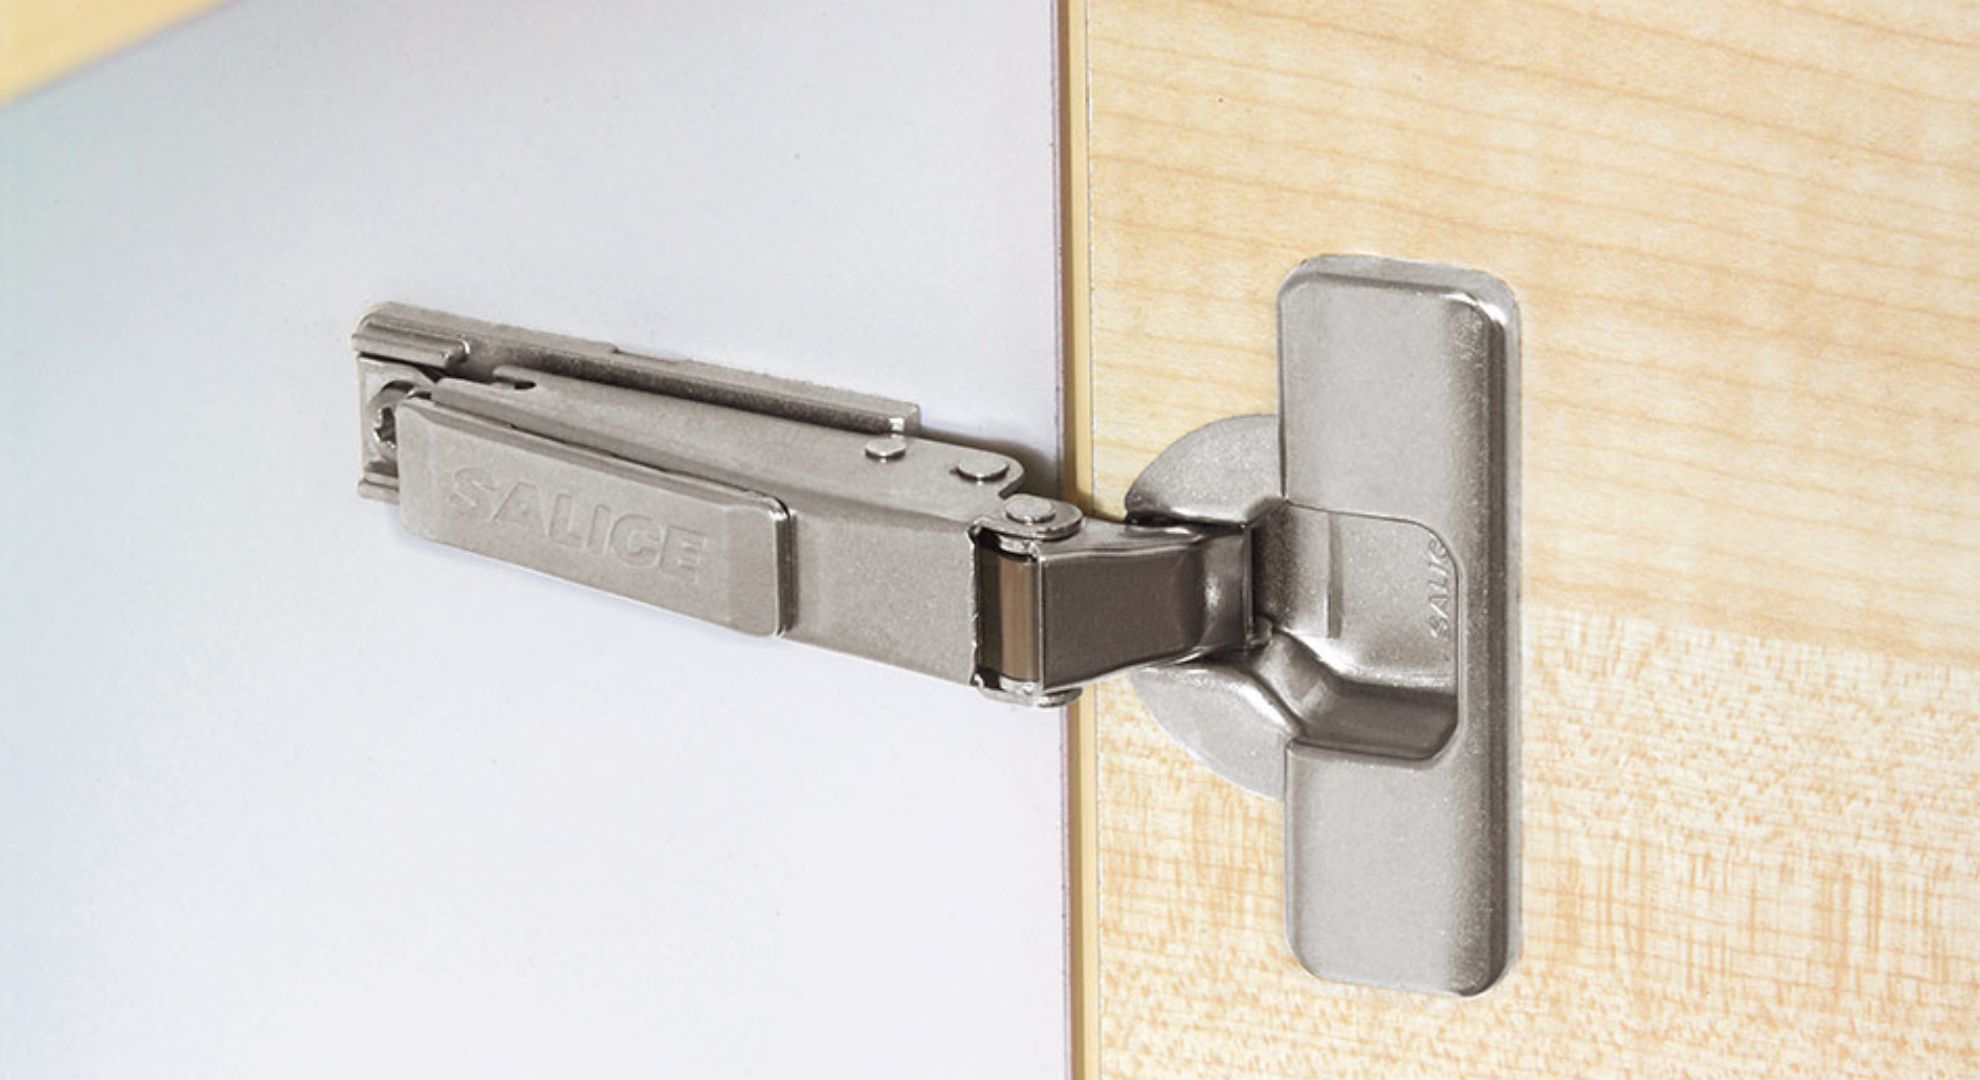 Where Can You Find the Best Soft-Close vs. Self-Close Hinges